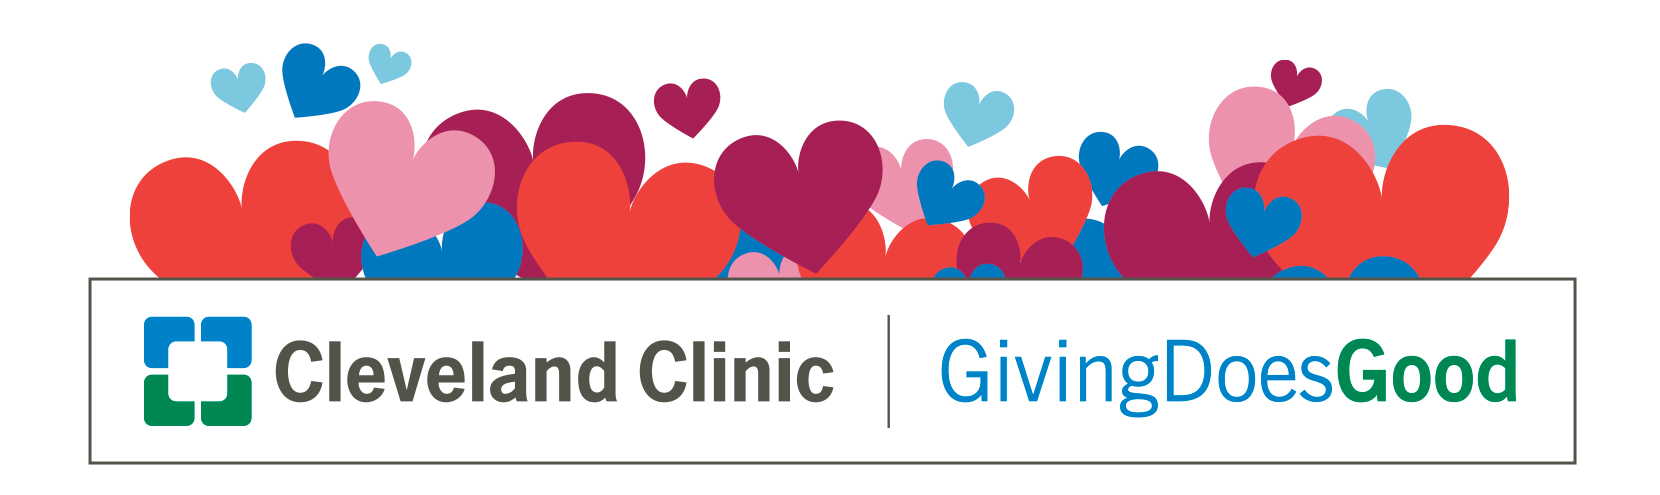 Cleveland Clinic Donations Banner